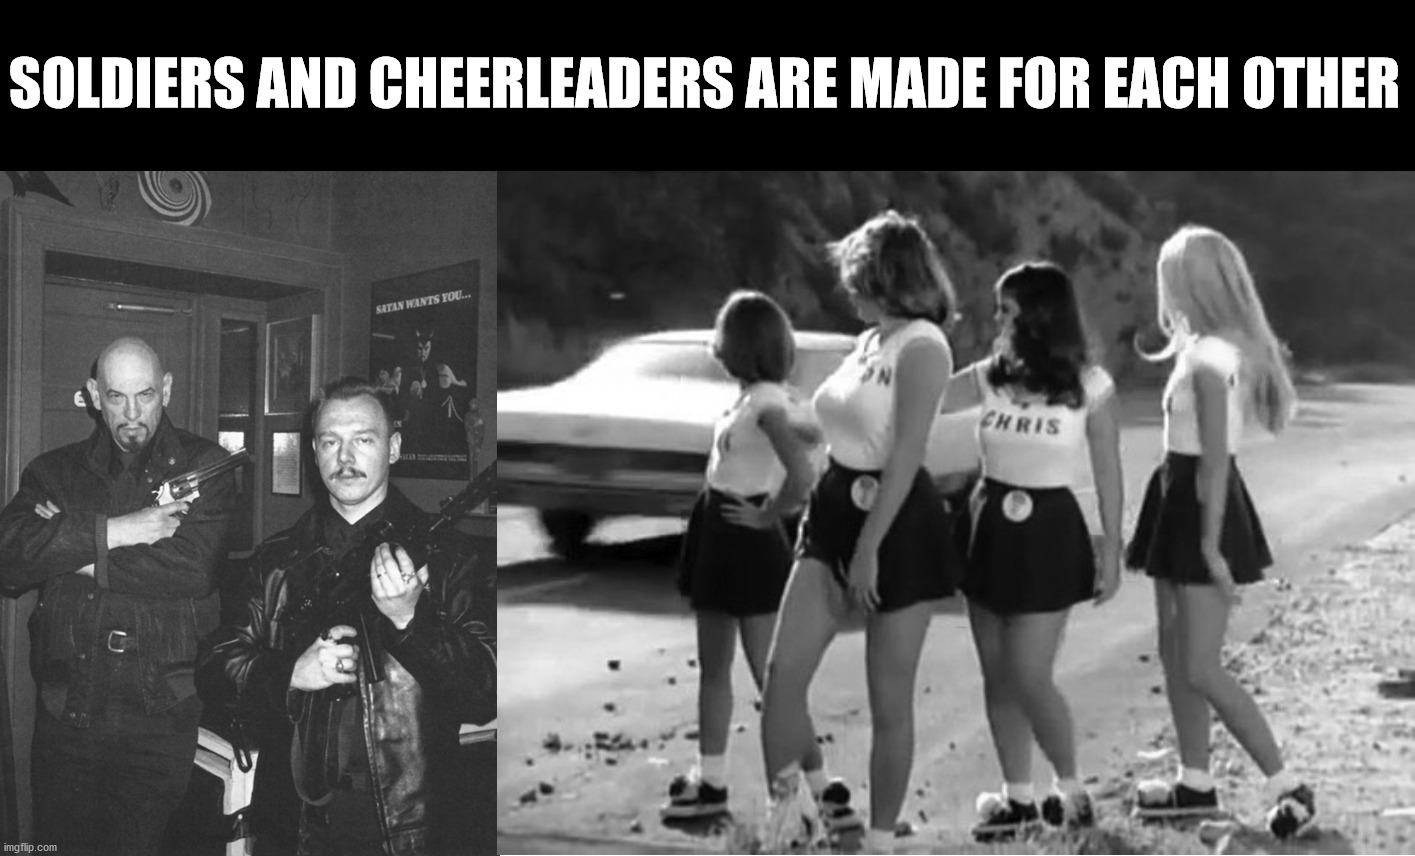 Birds of a feather flock together! |  SOLDIERS AND CHEERLEADERS ARE MADE FOR EACH OTHER | image tagged in soldiers,cheerleaders,birds of a feather,two peas in a pod | made w/ Imgflip meme maker